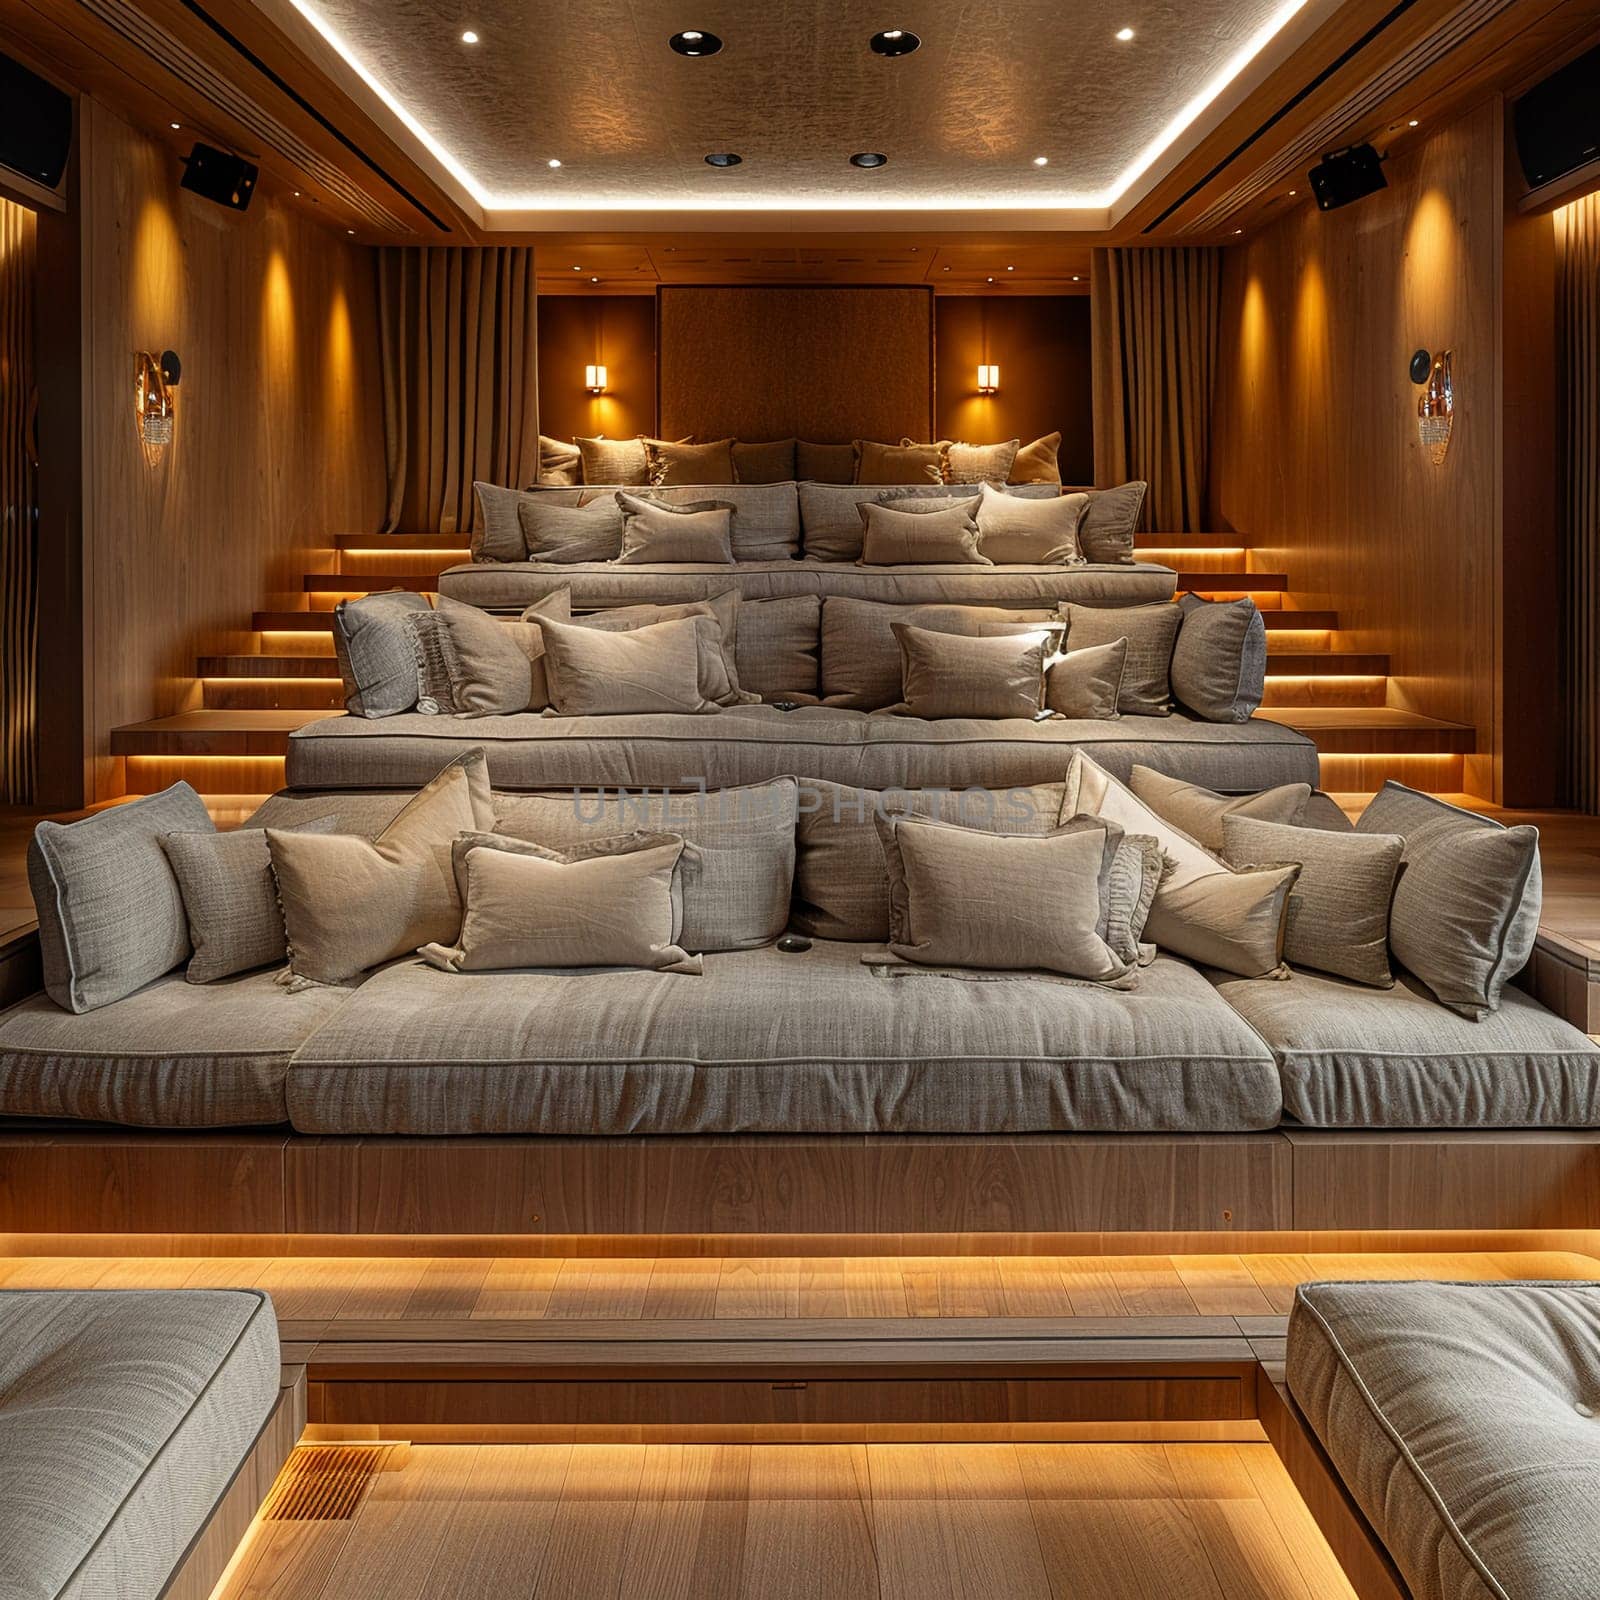 Luxurious home theater with plush seating and state-of-the-art sound system8K